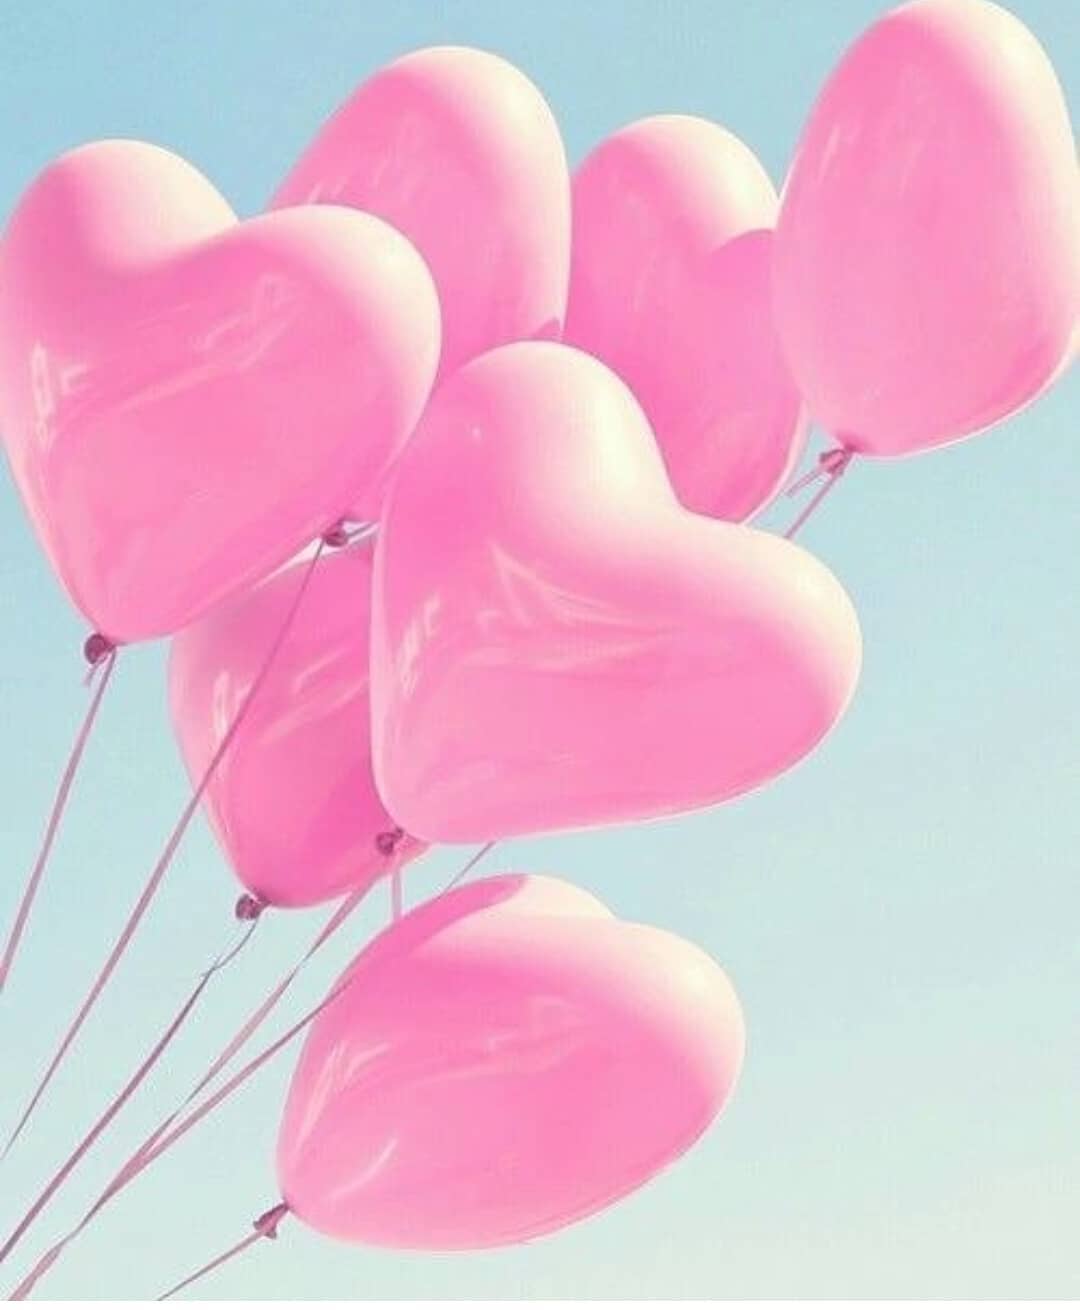 Pink Balloons Instagram profile picture